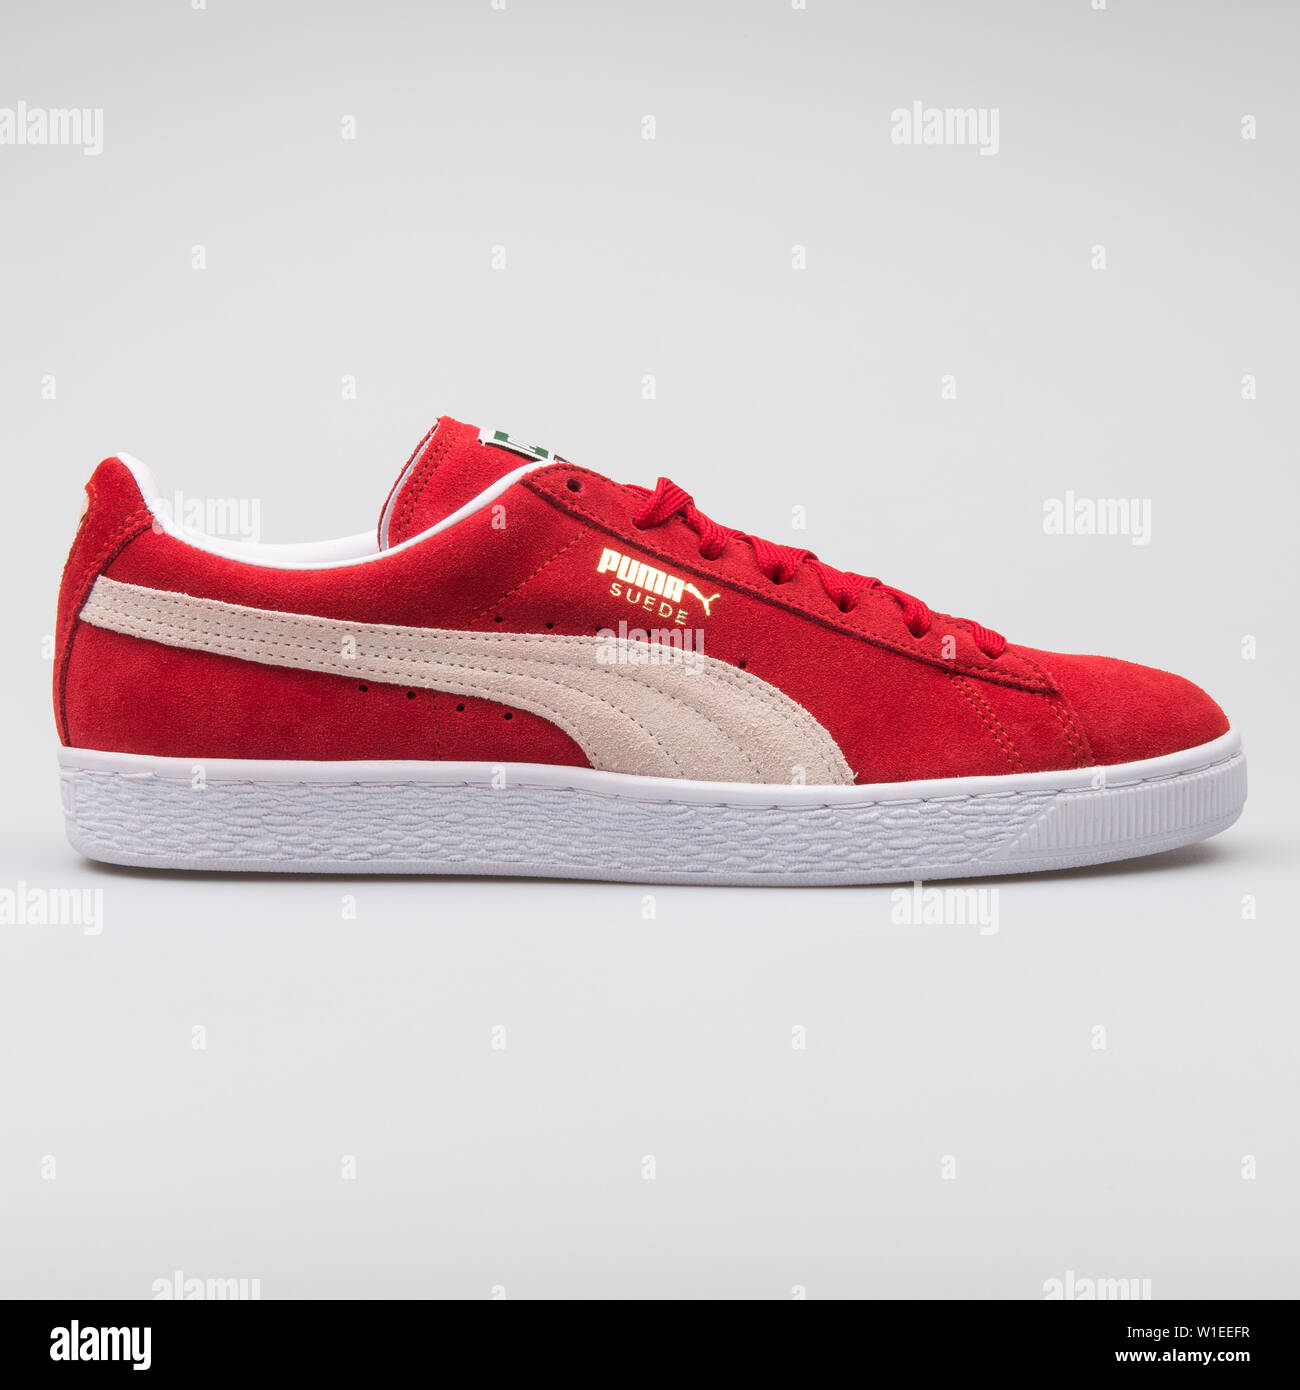 VIENNA, AUSTRIA AUGUST 7, Suede Classic red sneaker on white background Stock Photo - Alamy